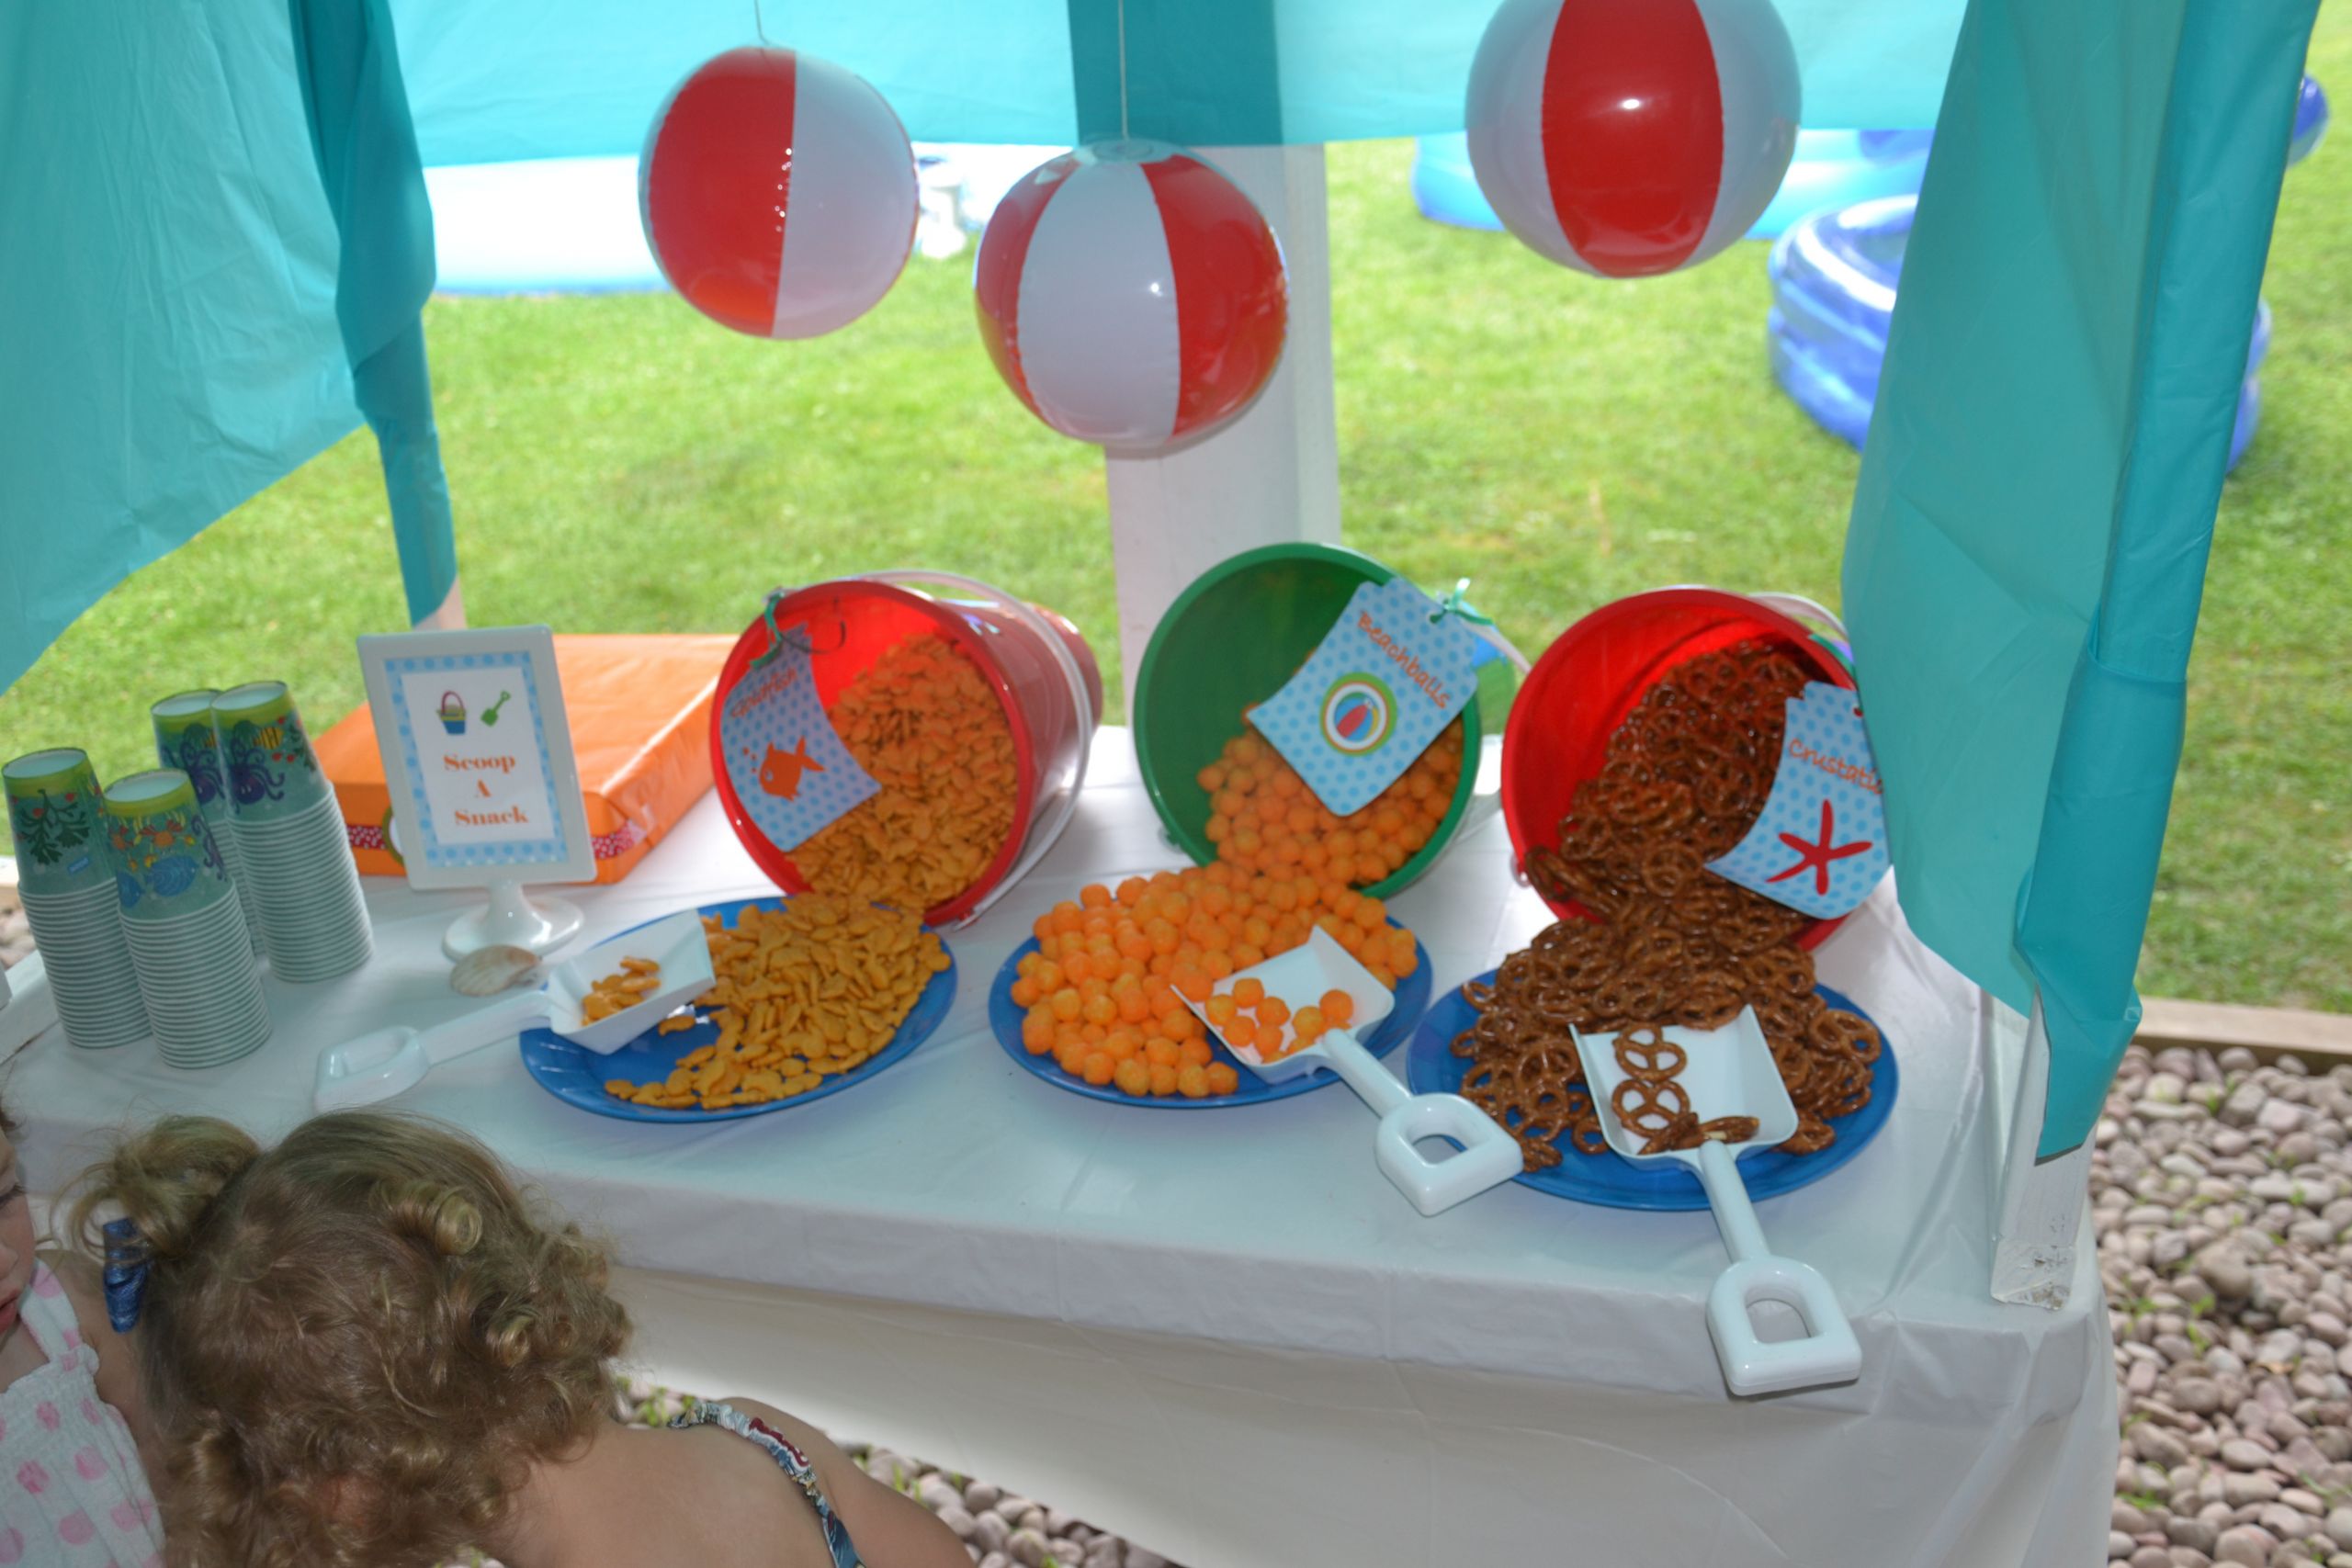 Beach Birthday Party Ideas For Kids
 Party on a Bud  Ideas for Serving Summer Snacks